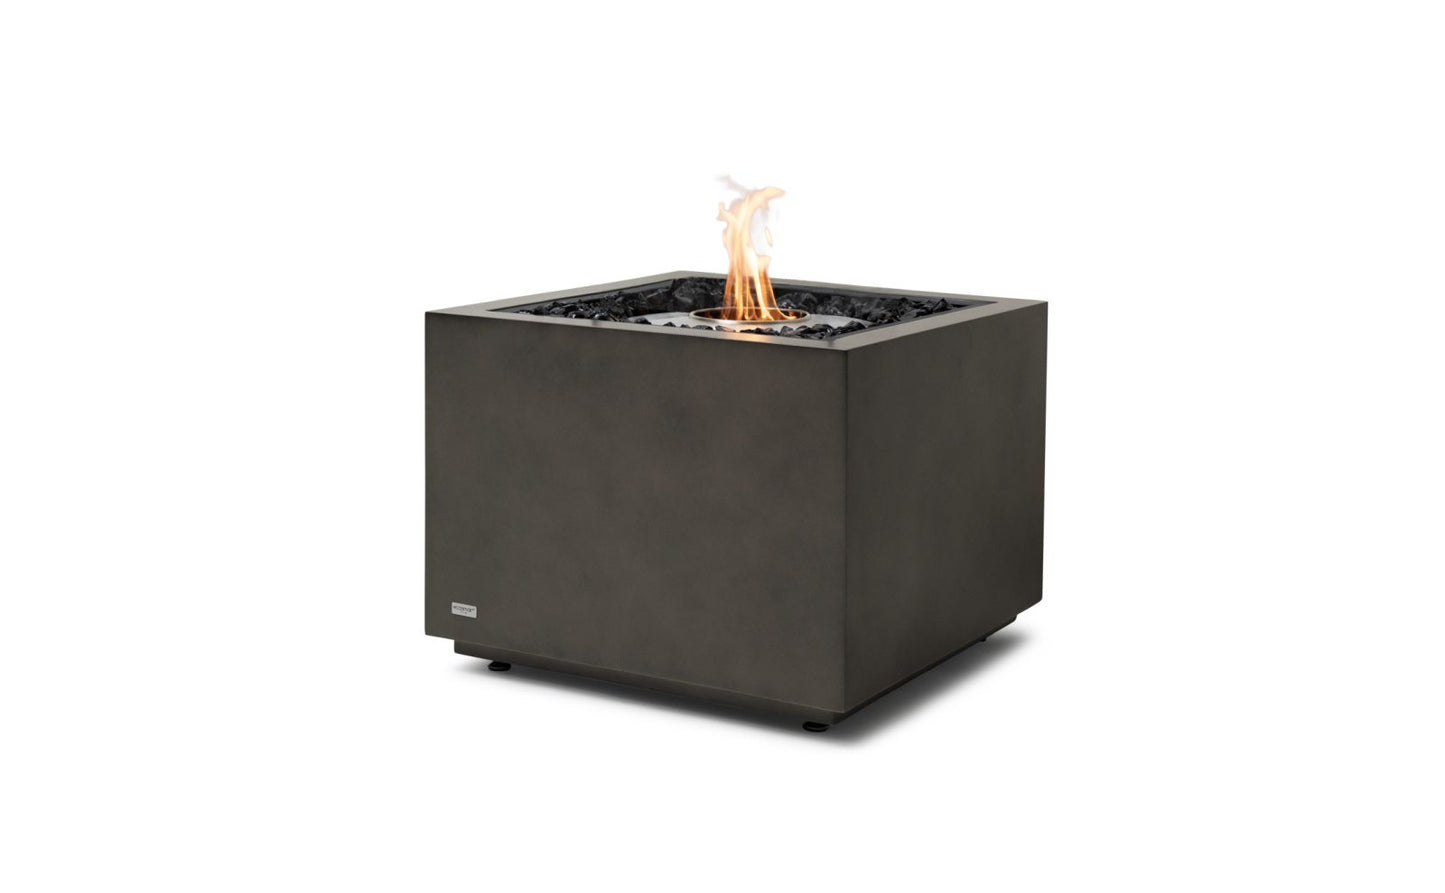 EcoSmart Fire - Sidecar 24 - Fire Pit Table - Natural